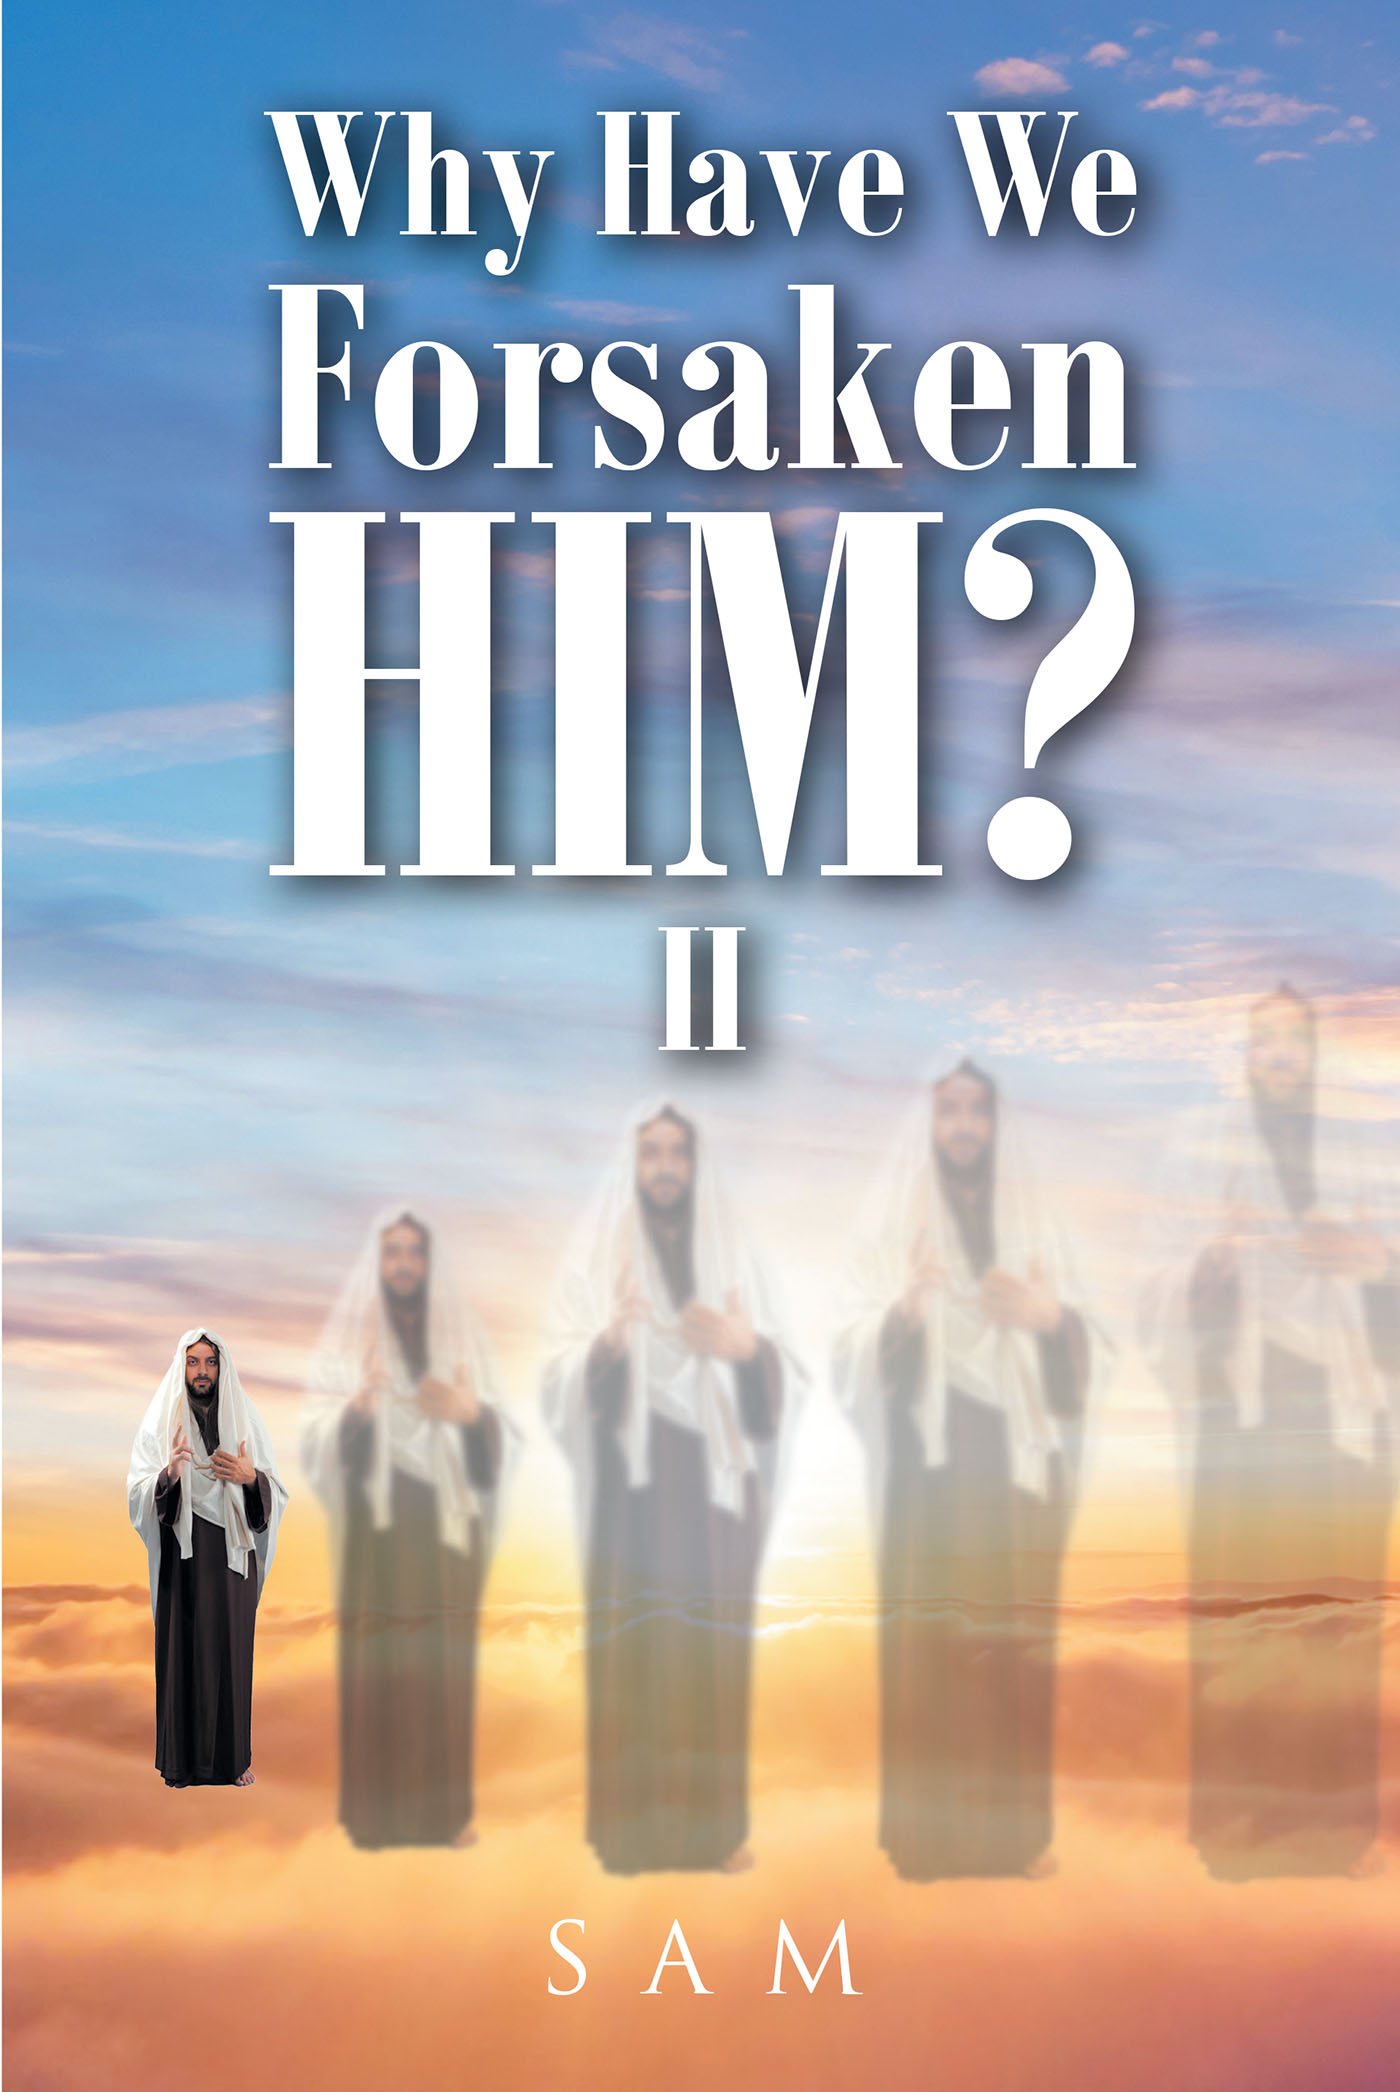 Sam’s Newly Released “WHY HAVE WE FORSAKEN HIM? II” is a Thoughtful Reminder of the Need to Begin Each Day with God